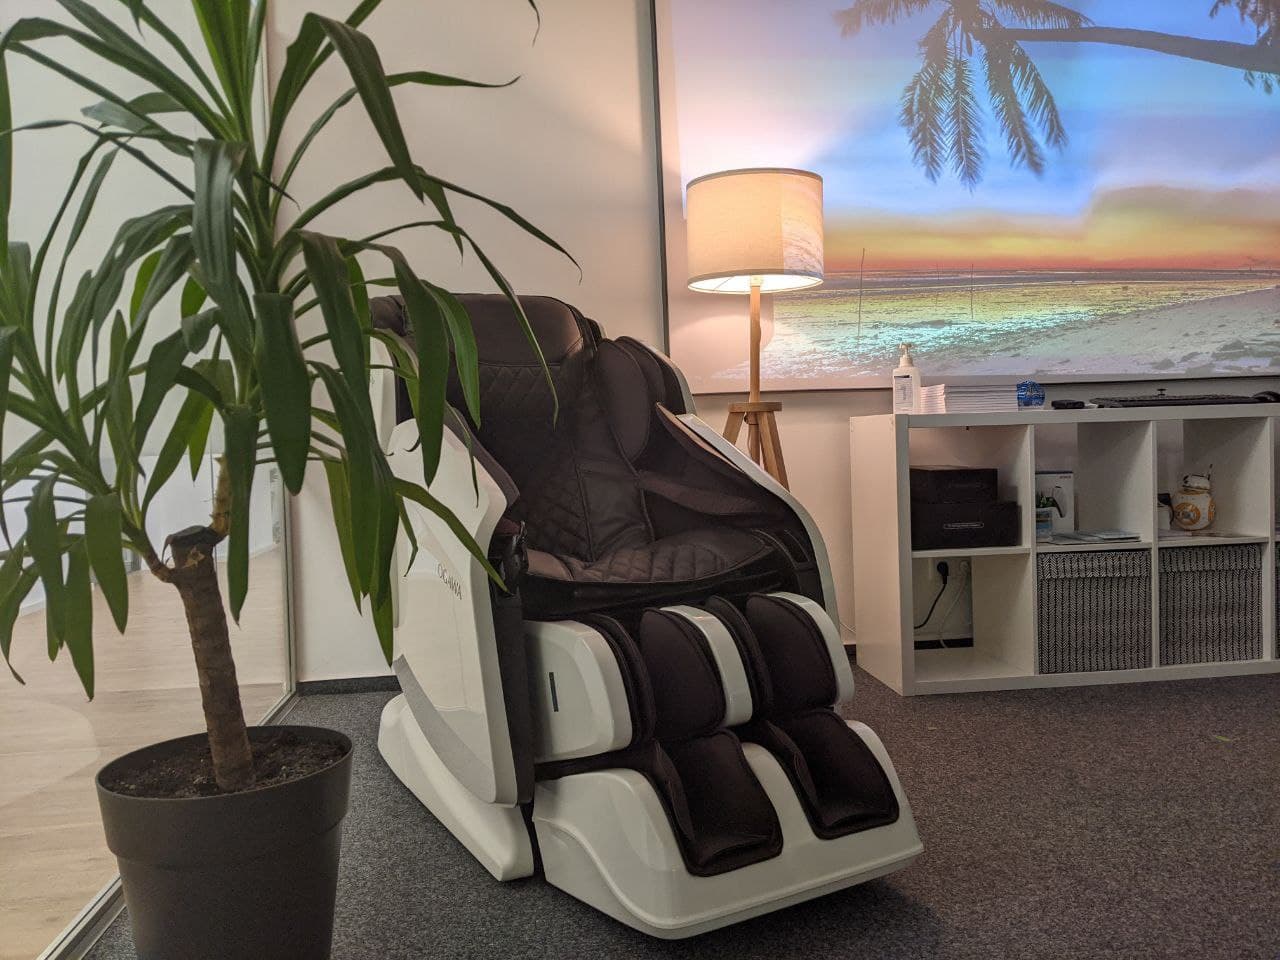 Massage chairs and rest areas as a solution to problems